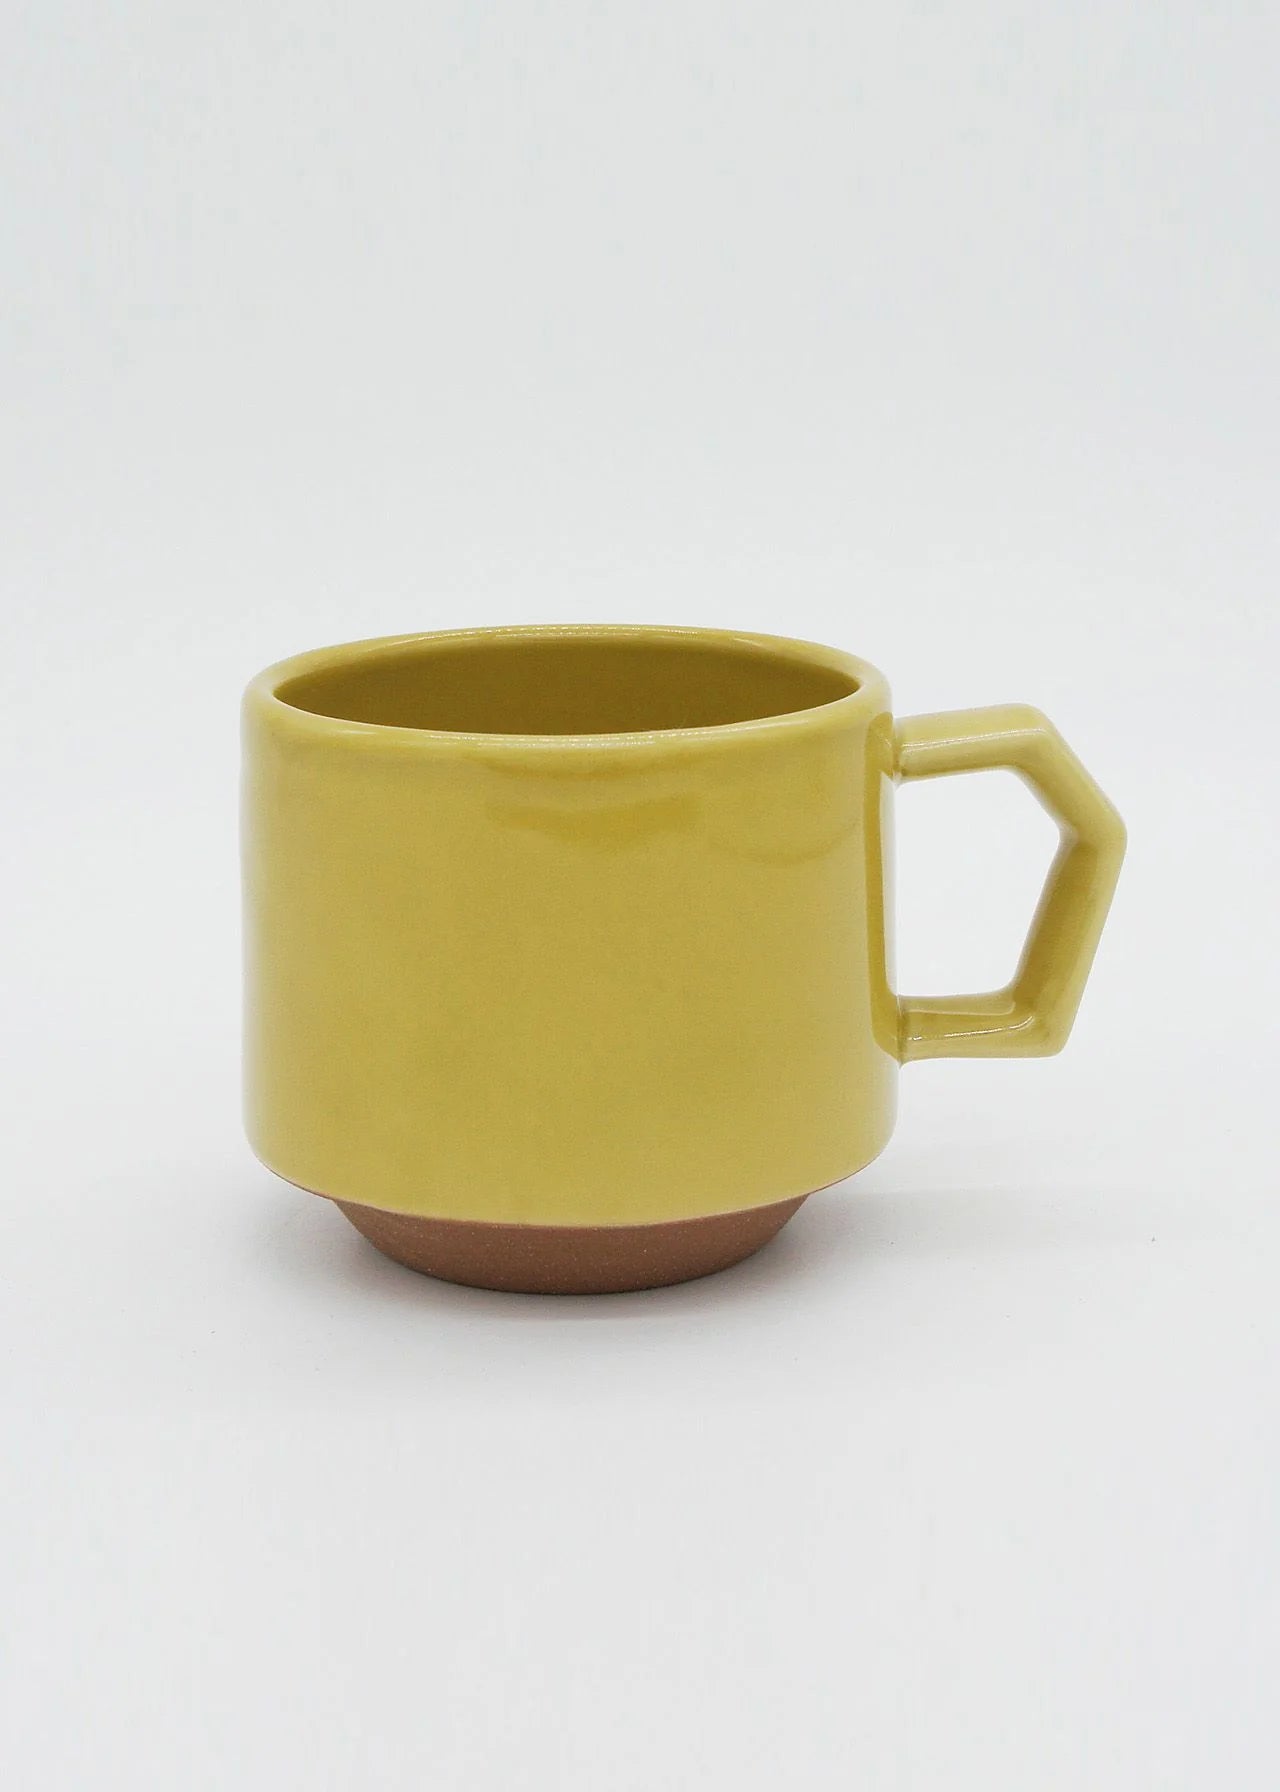 An artisan Stacking Mug – Mustard with a handle on a white background by CHIPS Inc.